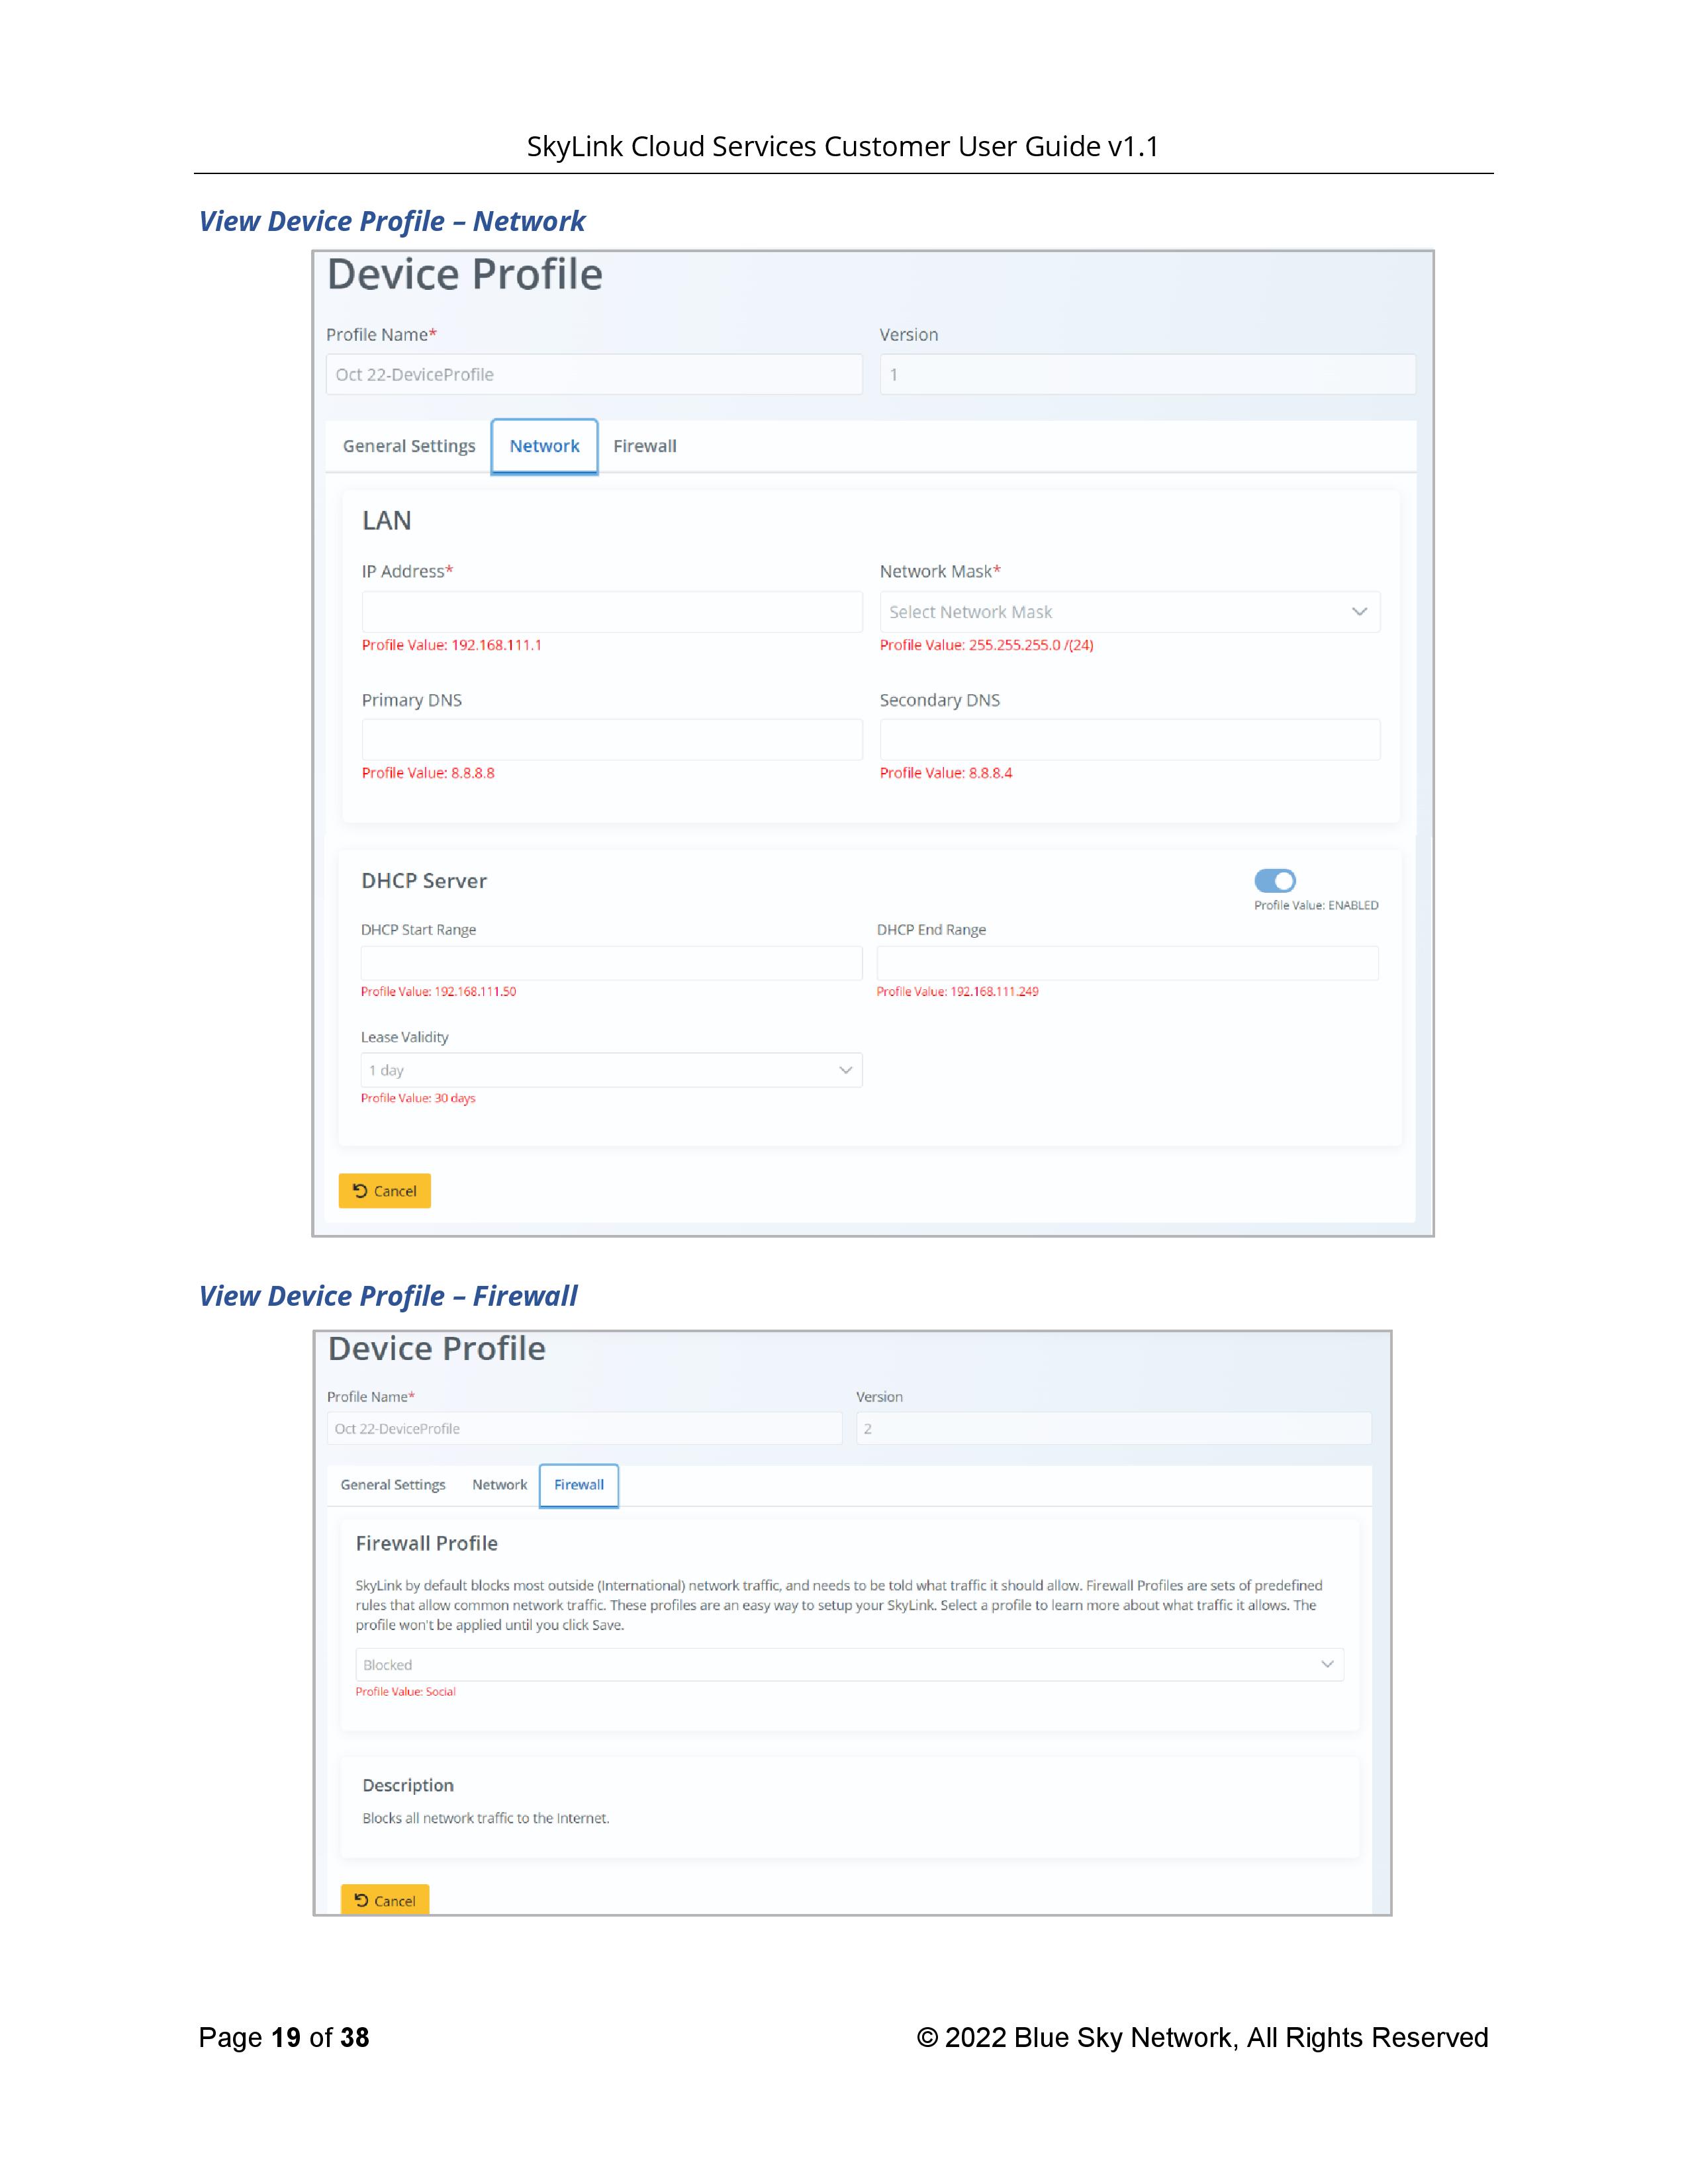 SkyLink-Cloud-Services-Customer-User-Guide-page-019.jpg